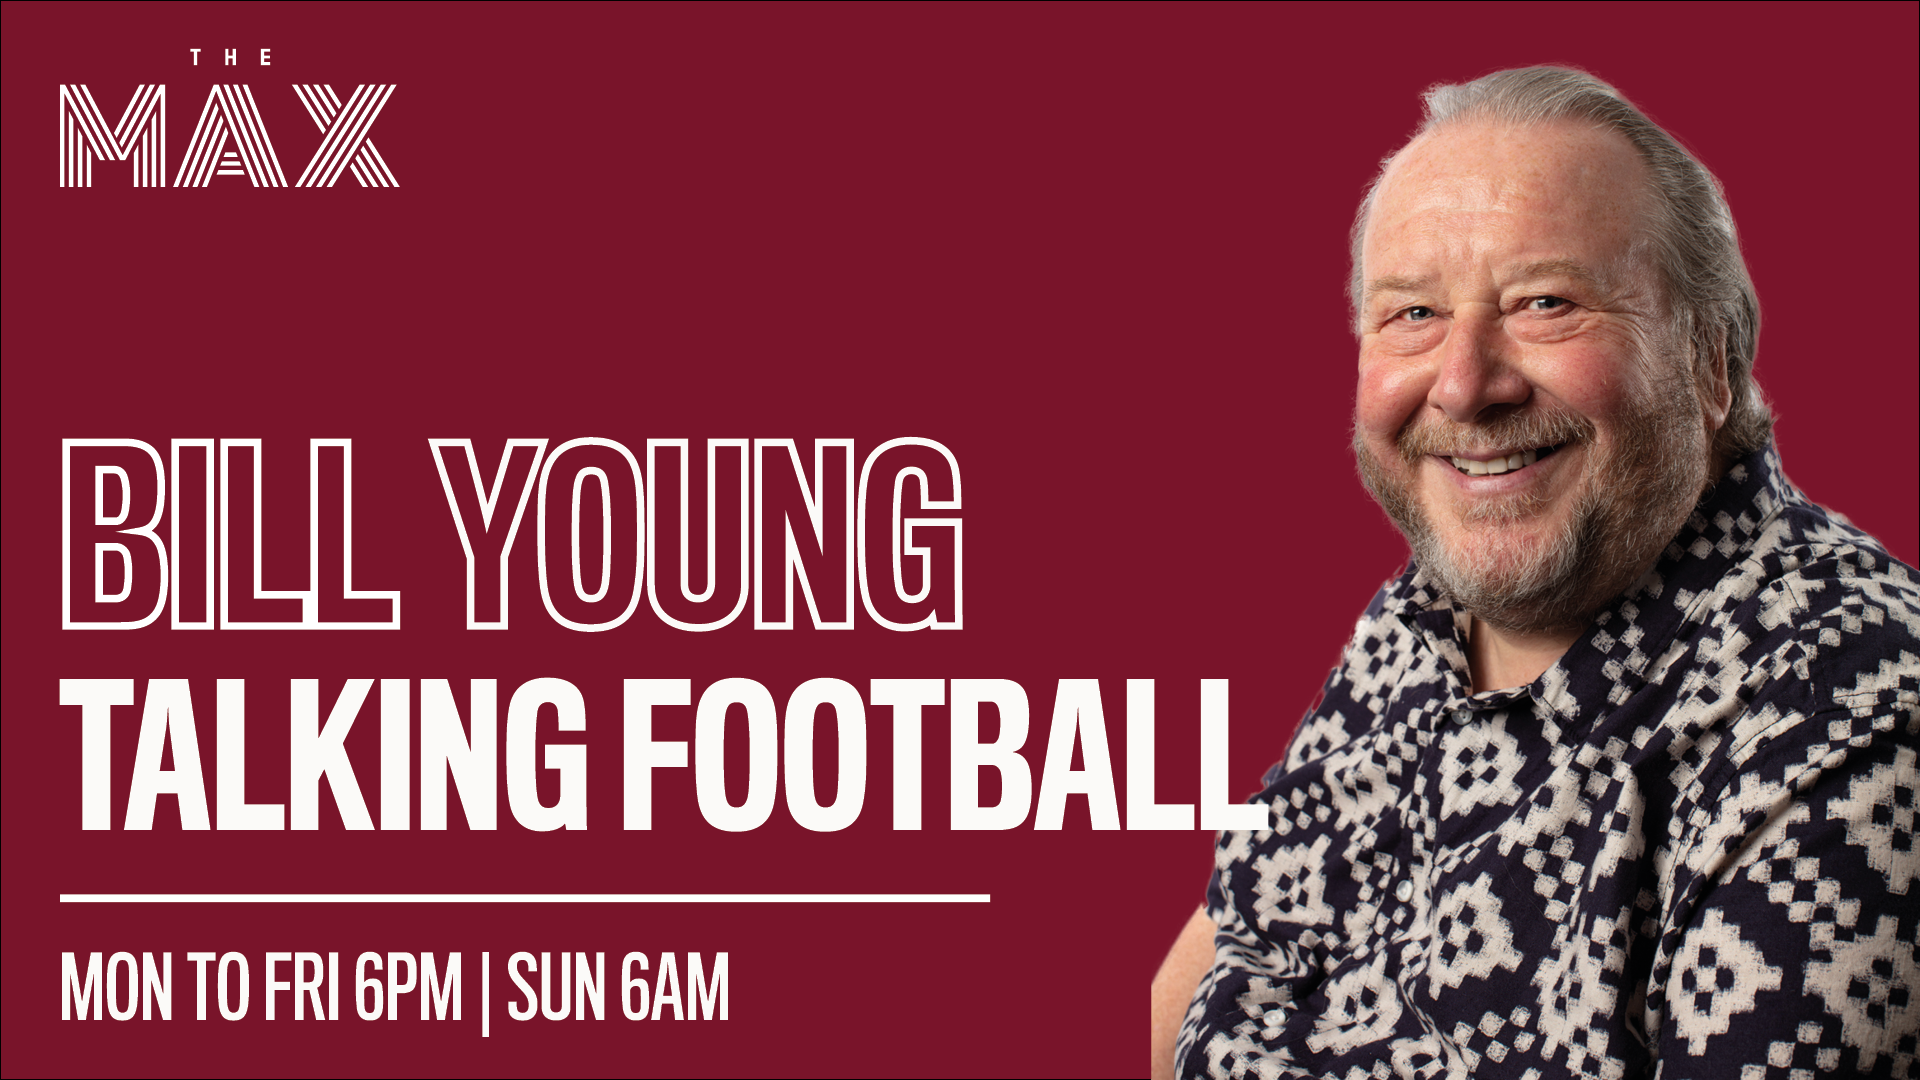 Talking Football with Bill Young - Monday 29th March